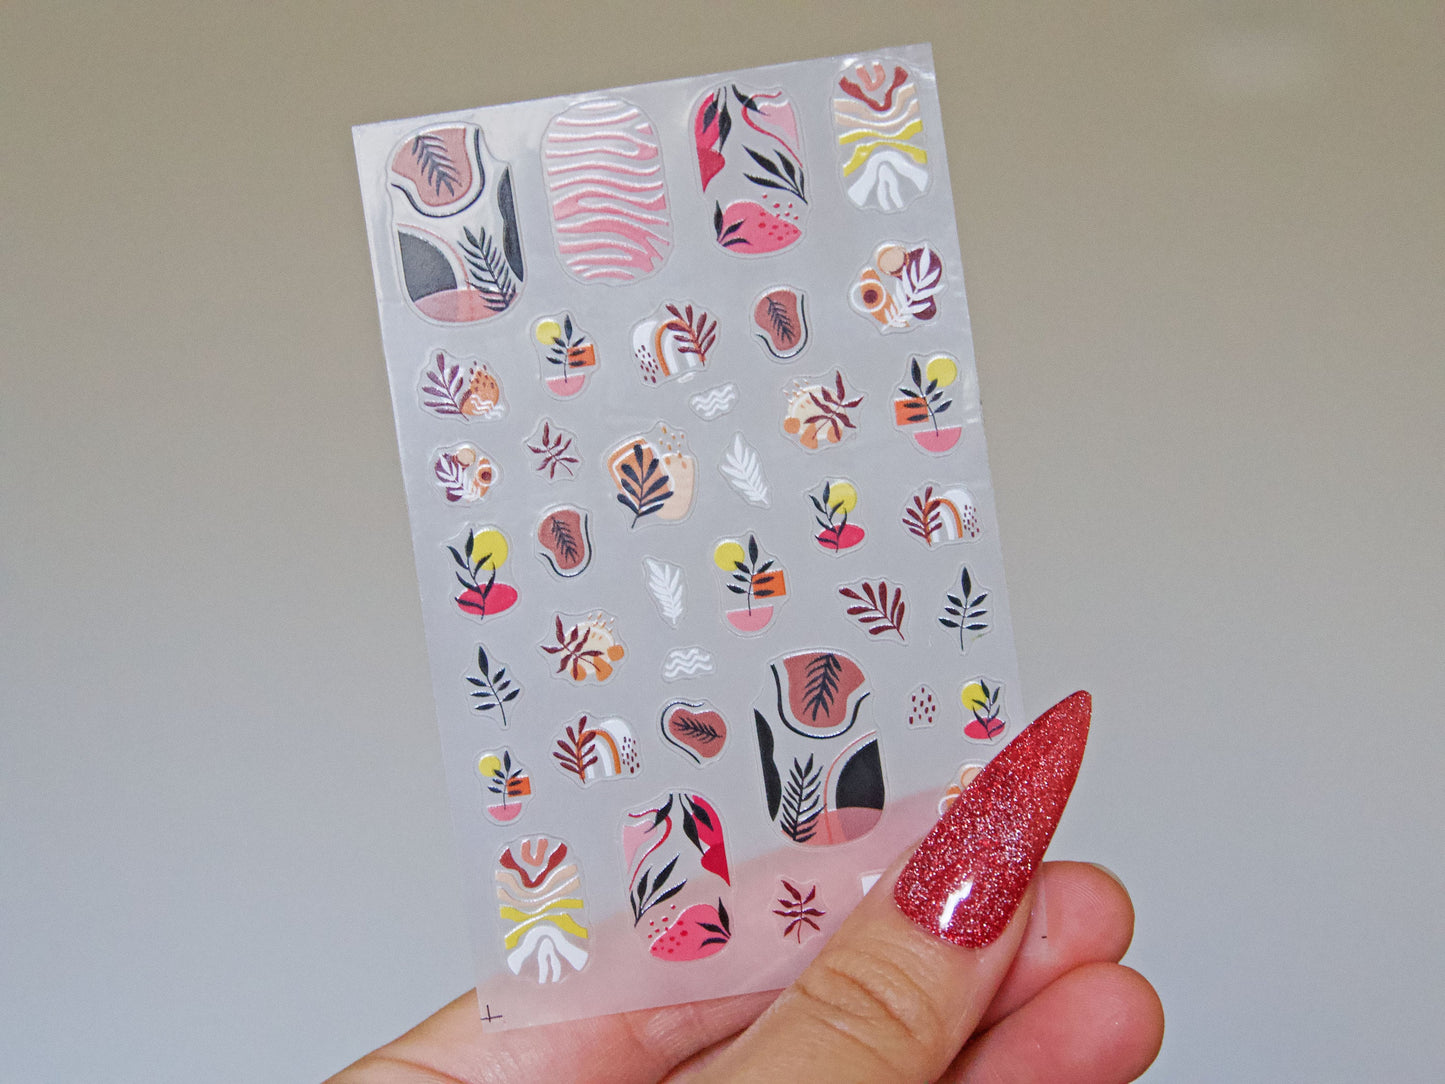 Winter Fall Maple Leaf Nail Sticker/ Red-Yellow Radiance Falling Leaves Nature's Palette Nails Decal/ Autumn Bliss Manicure